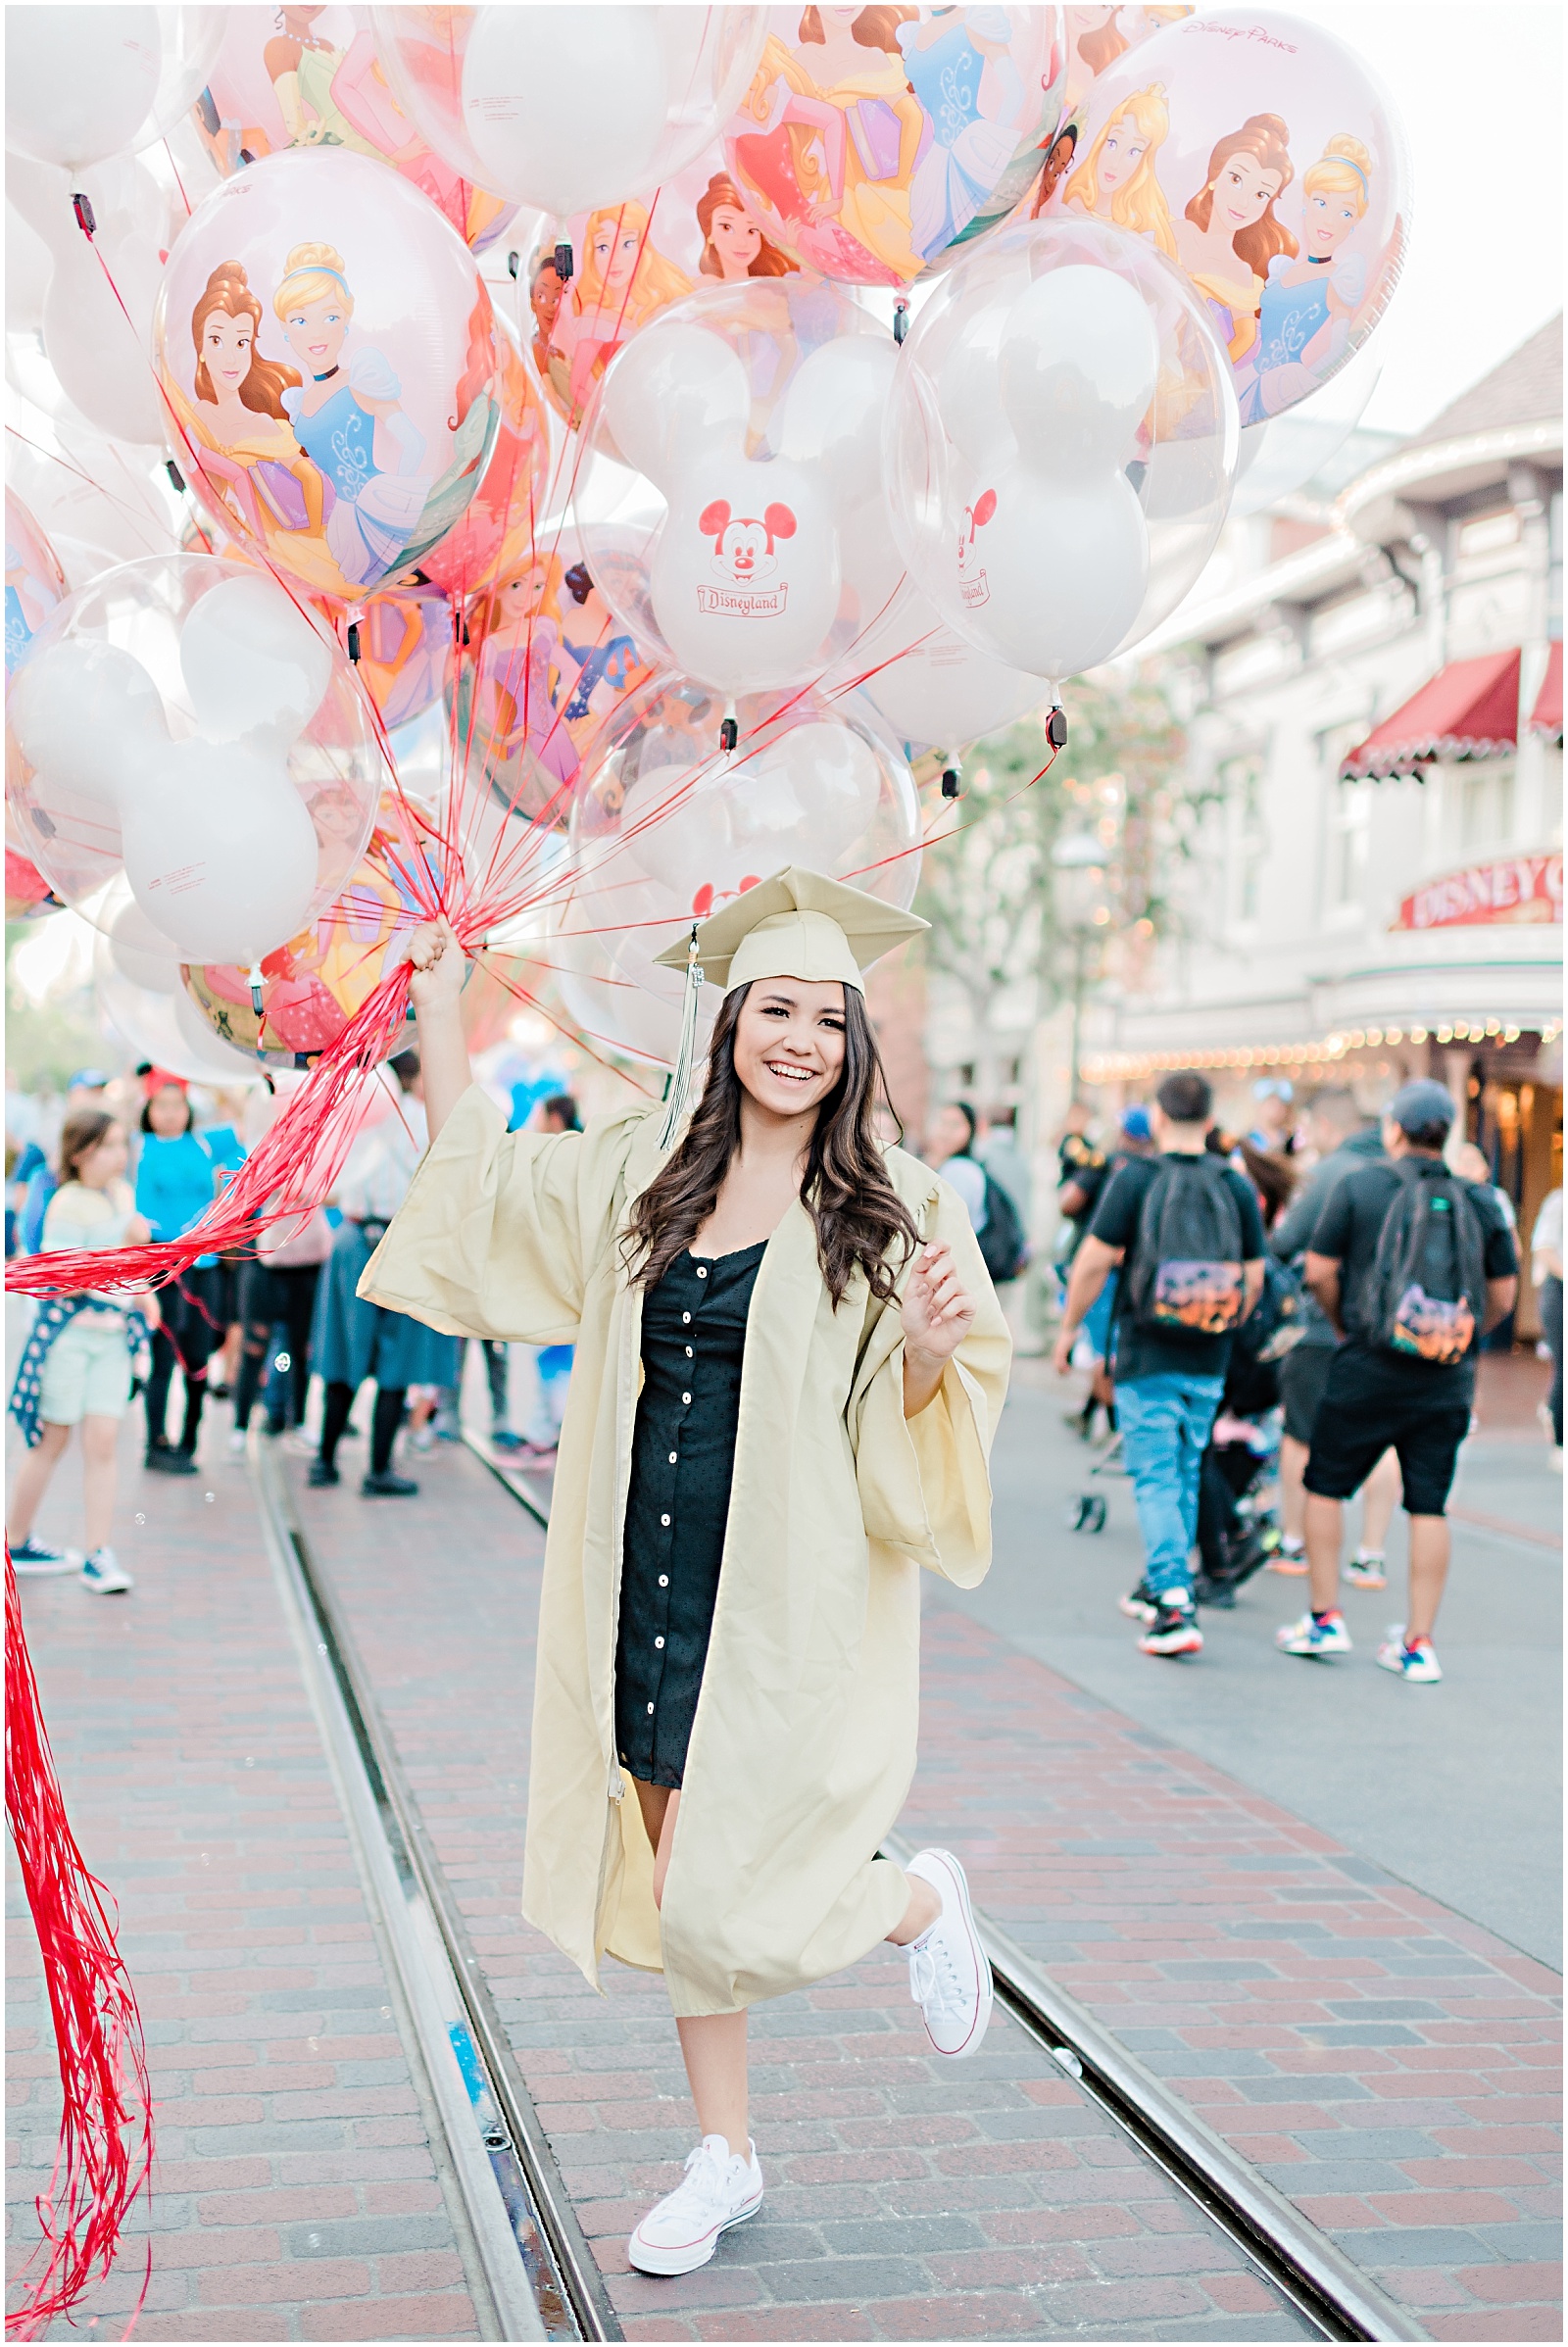 Disneyland Main Street Senior Session. Images by Mollie Jane Photography. To see more go to www.molliejanephotography.com.